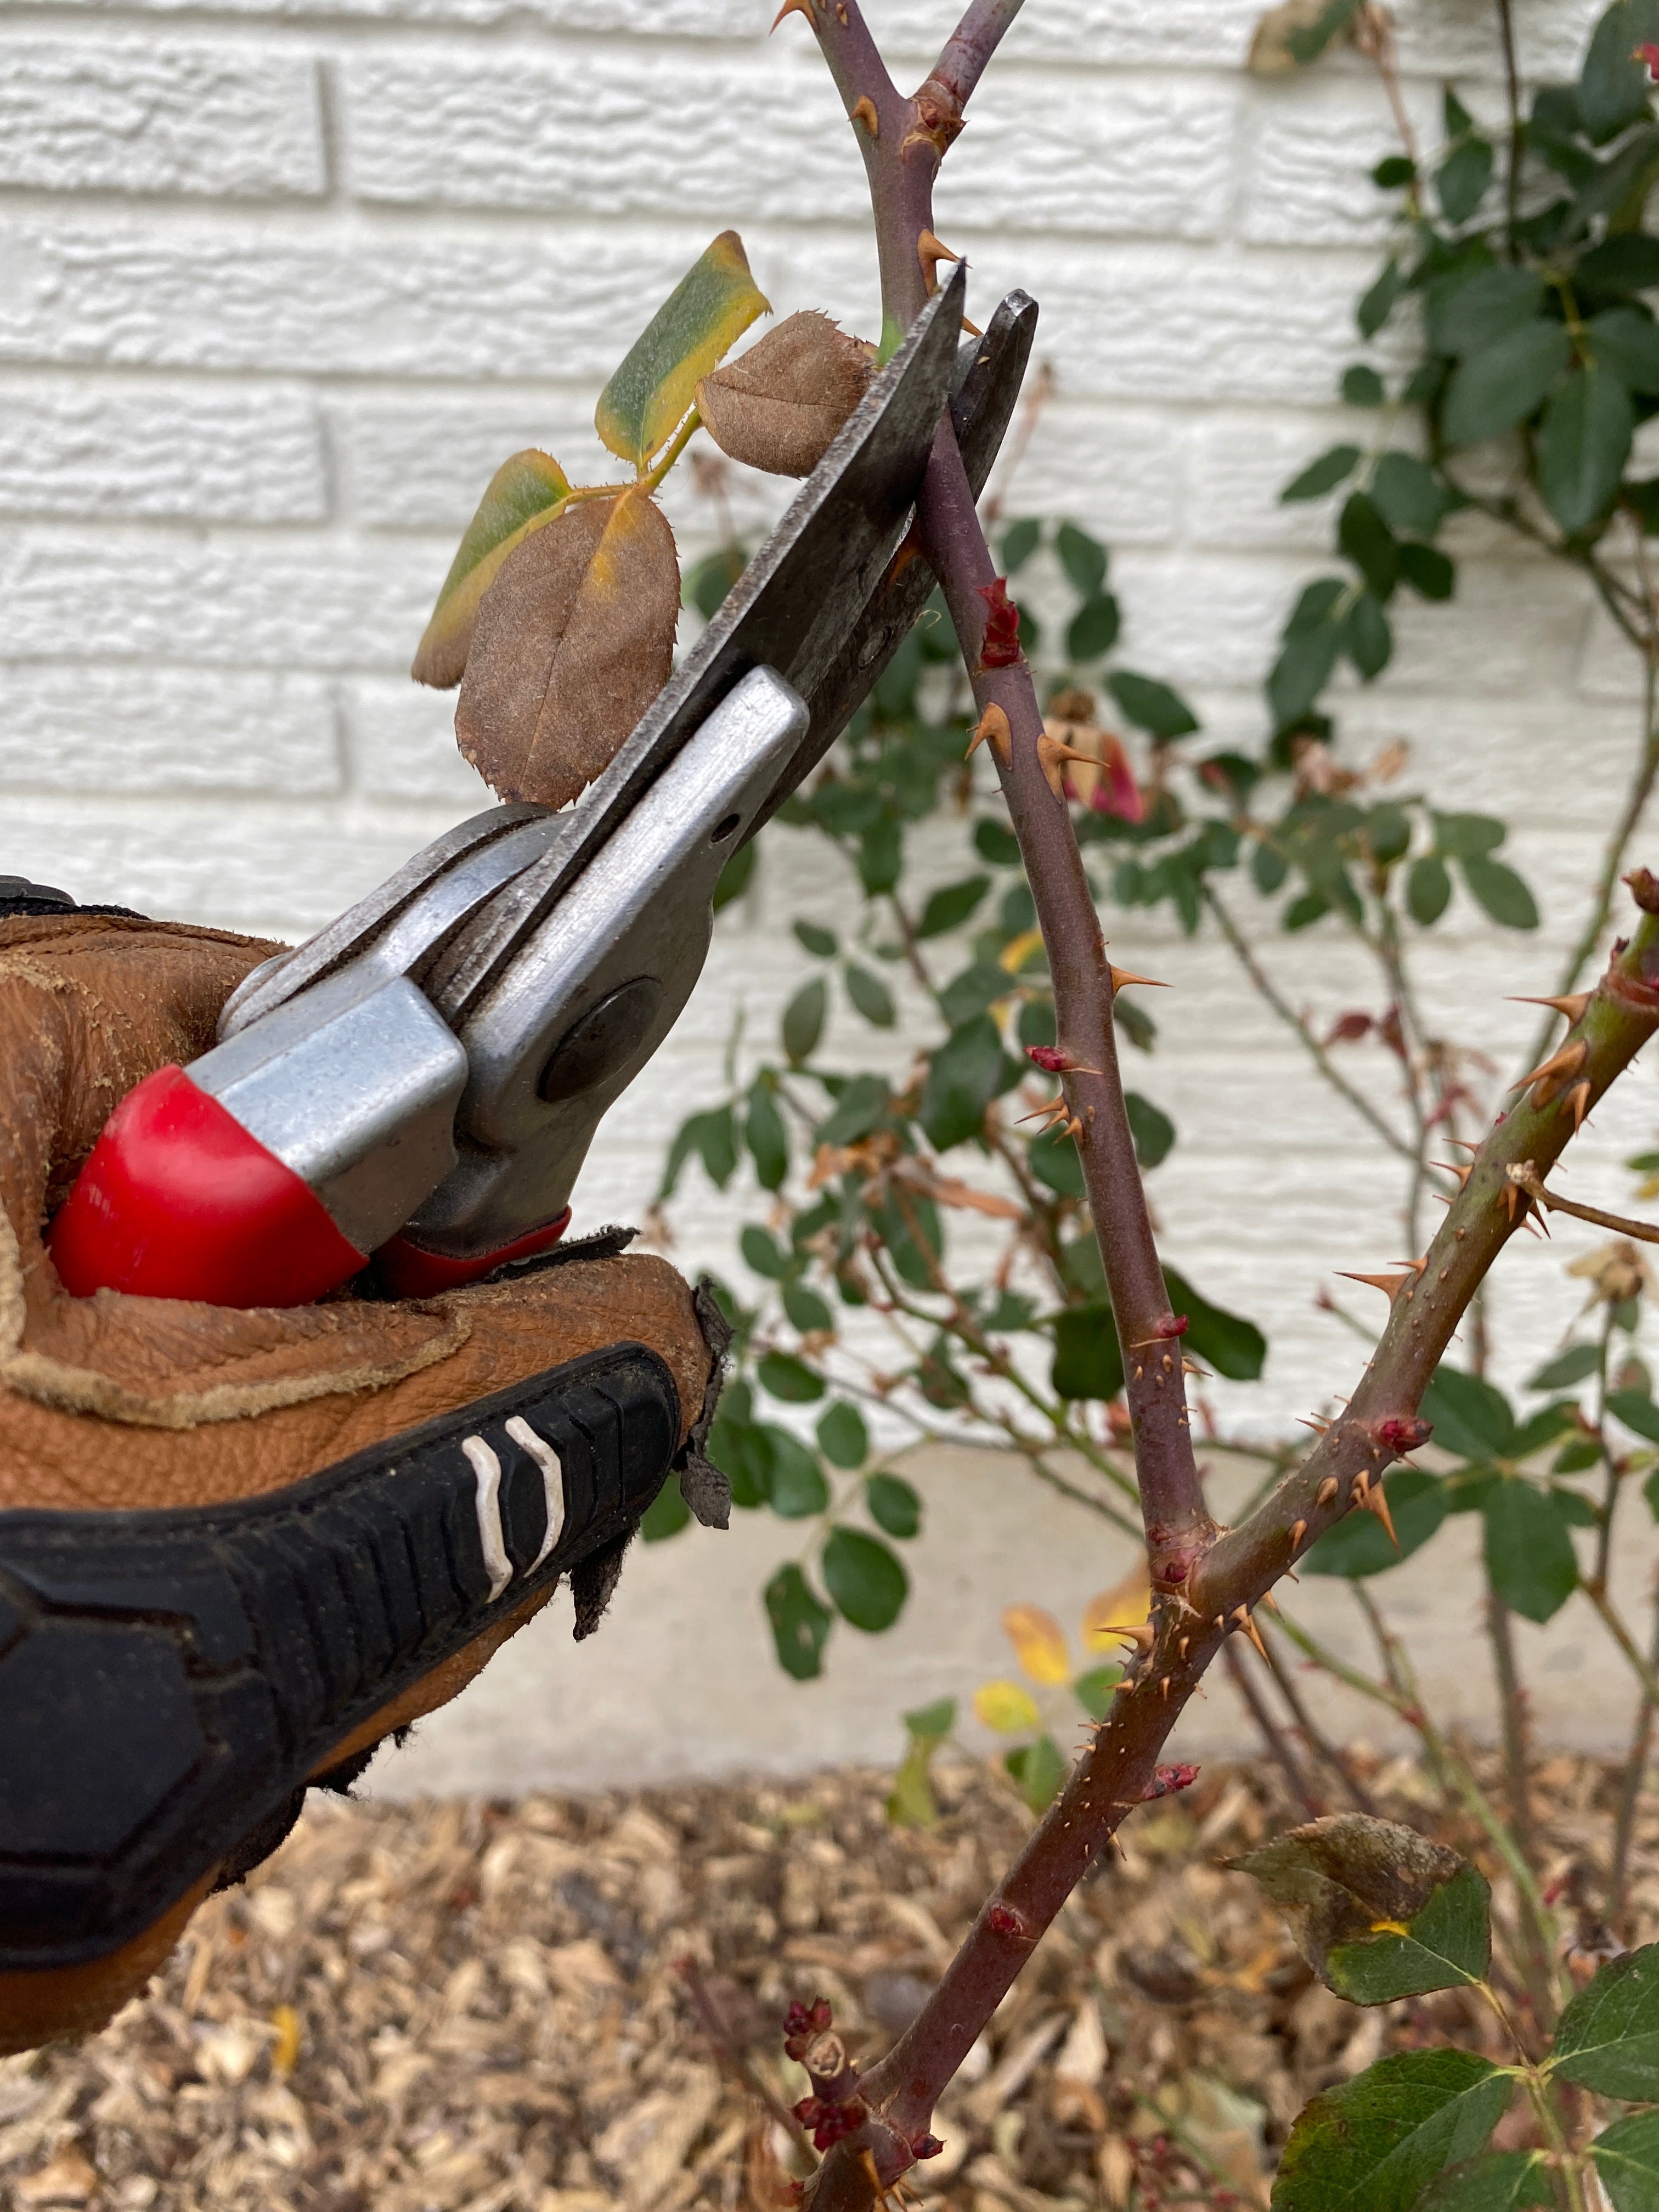 Pruning roses and cleaning your shears: What to do in the garden